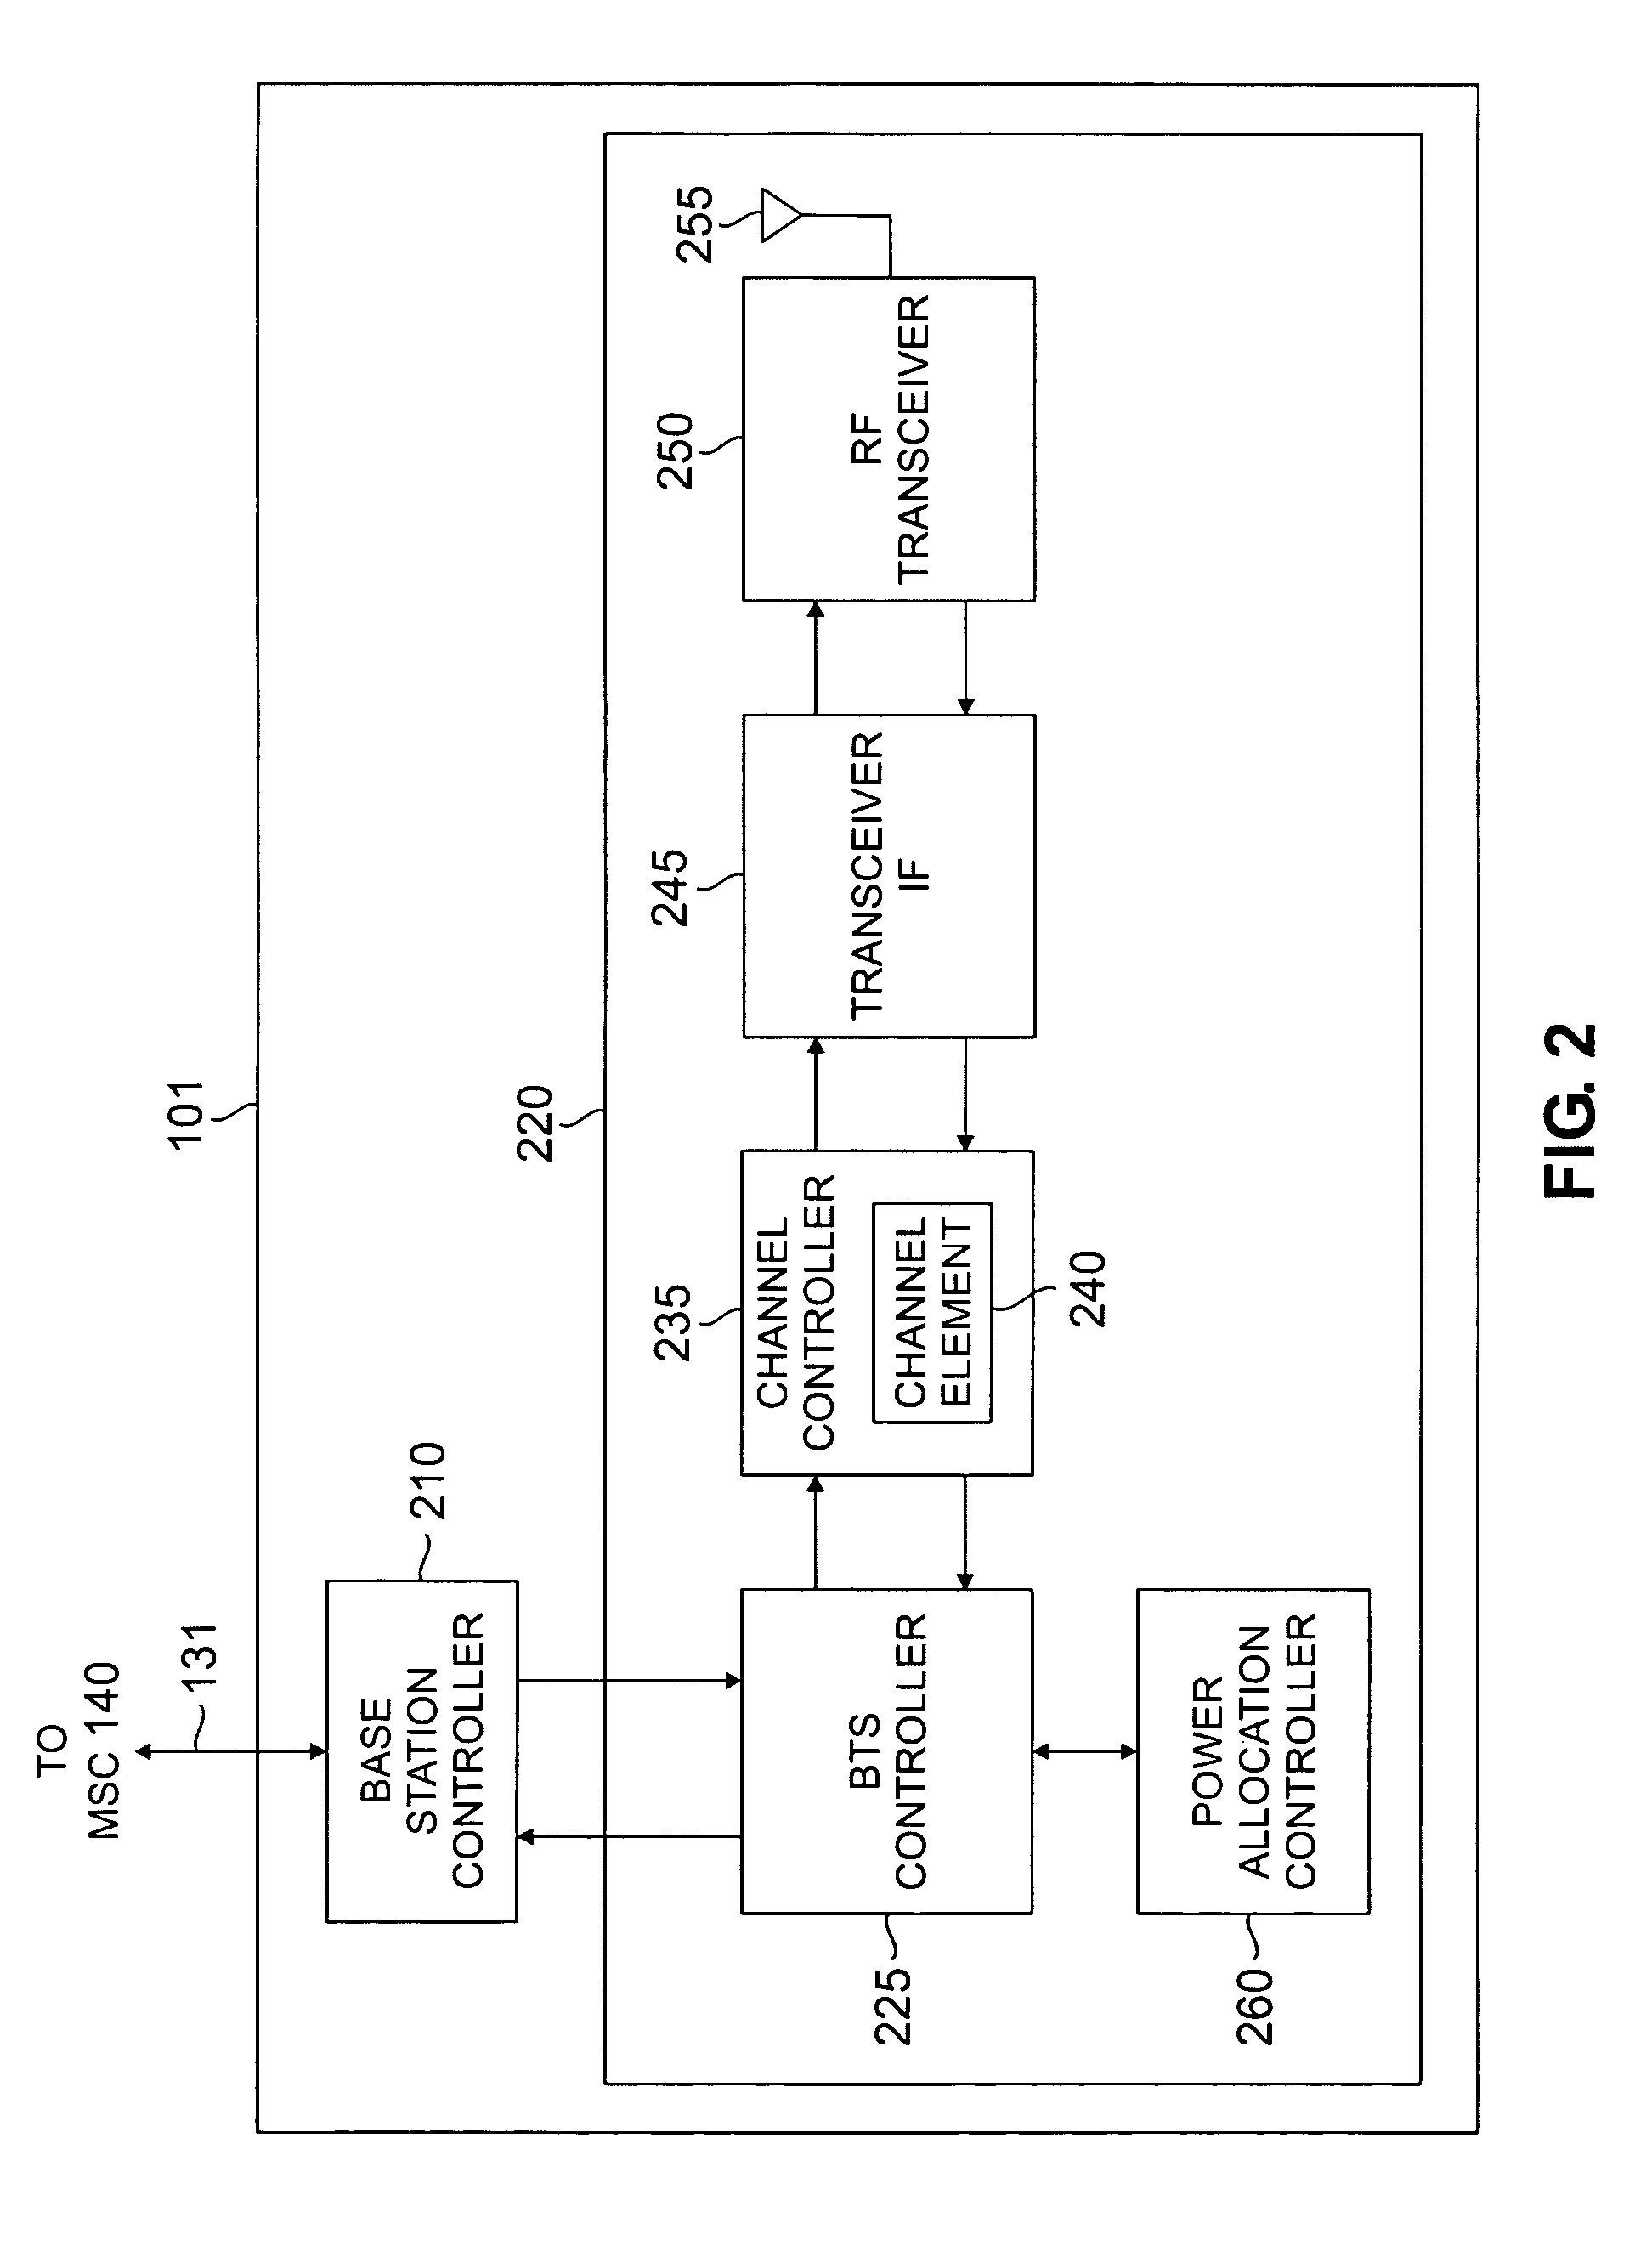 Apparatus and method for optimal power allocation between data and voice in a 1xEV-DV wireless network